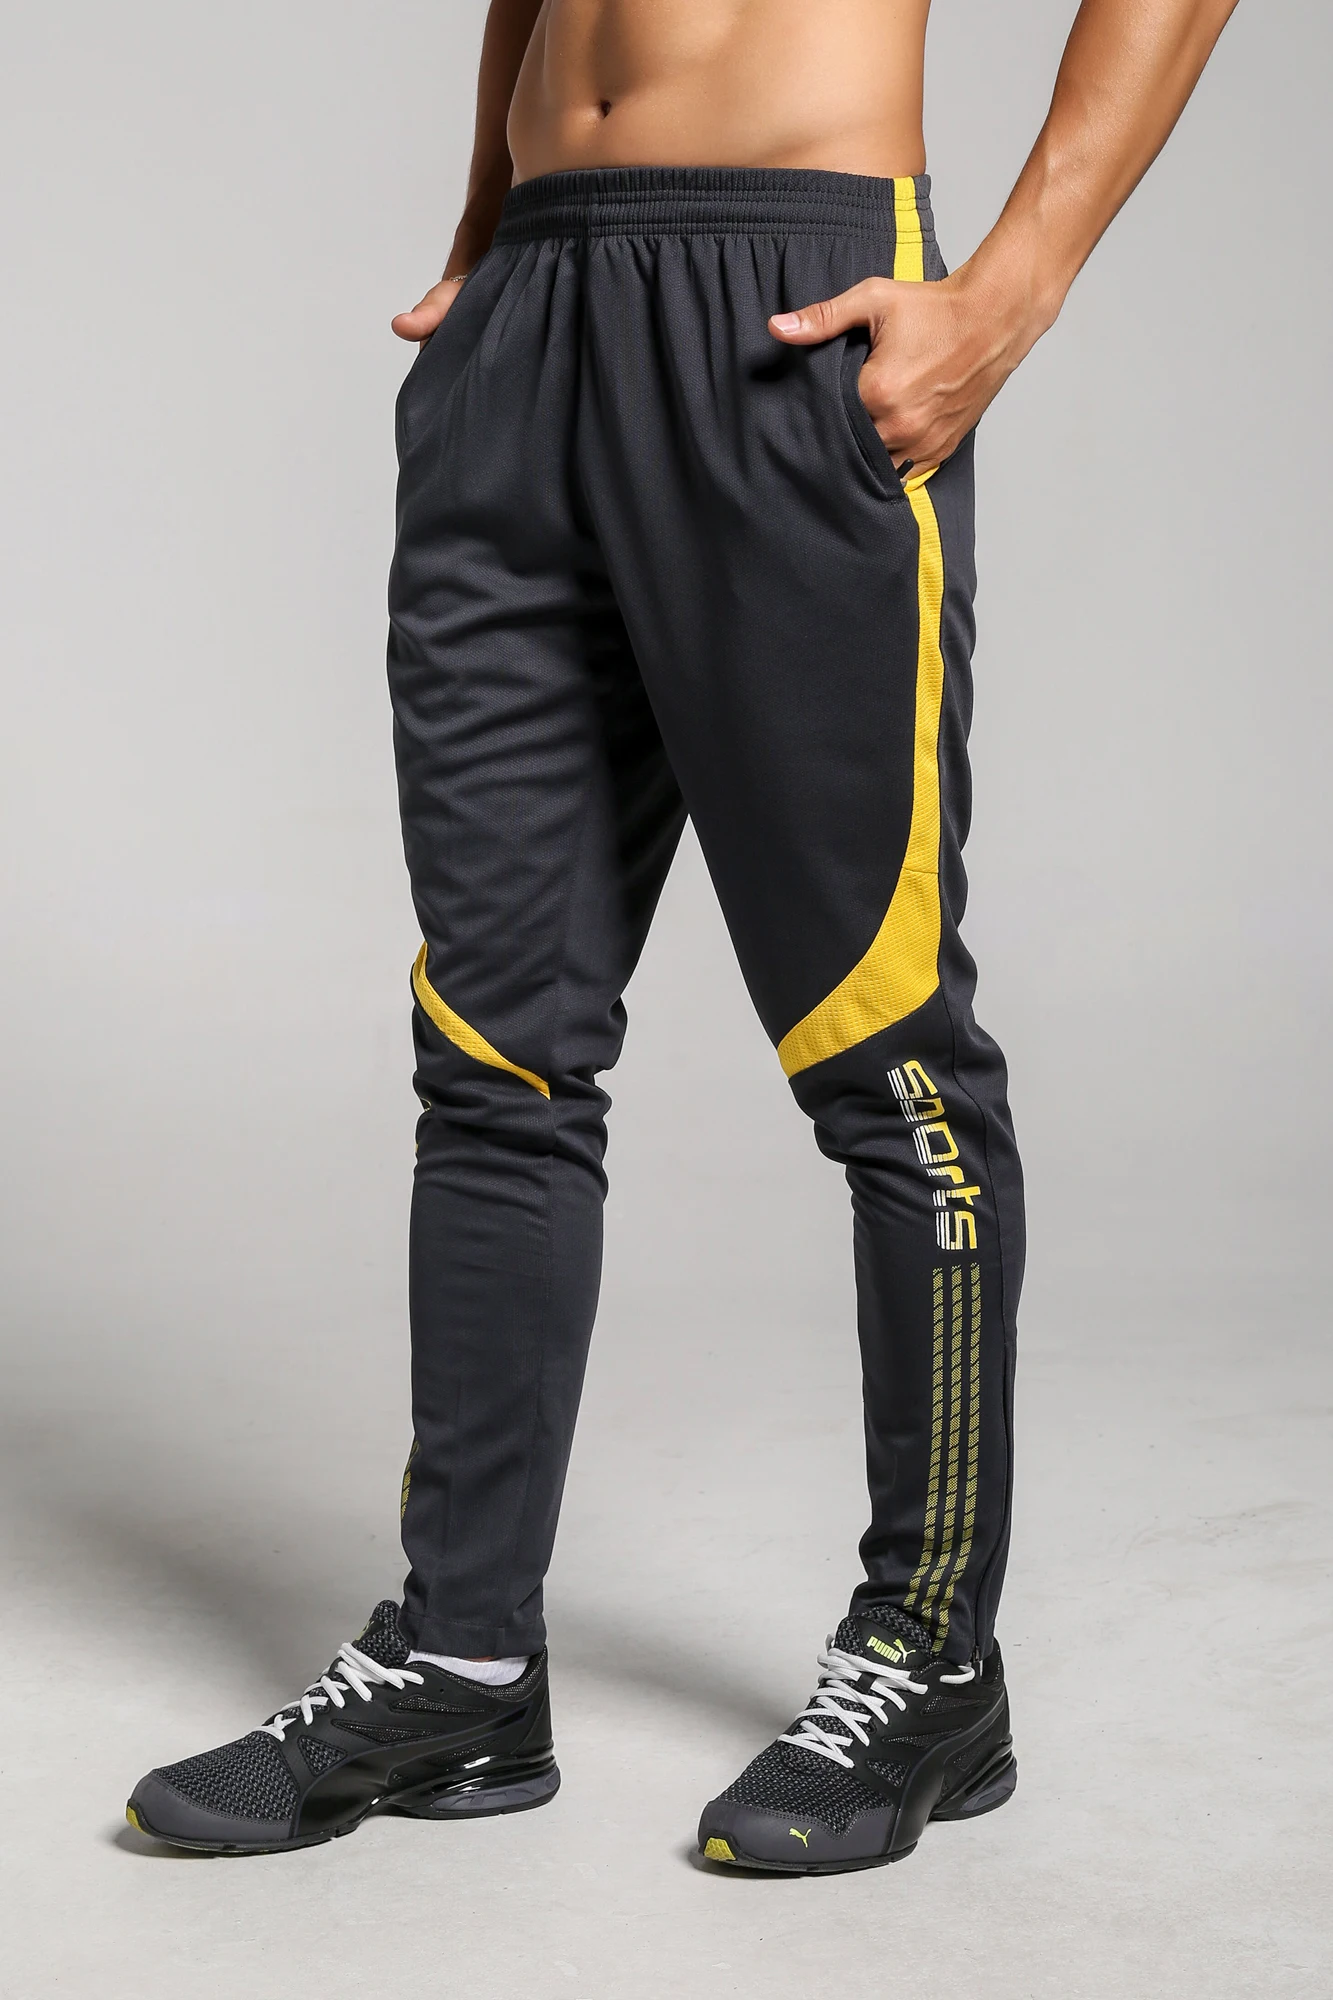 Image football pants thin legs soccer tracksuit  jogging soccer pants Men soccer jersey soccer training pants with zip pockets